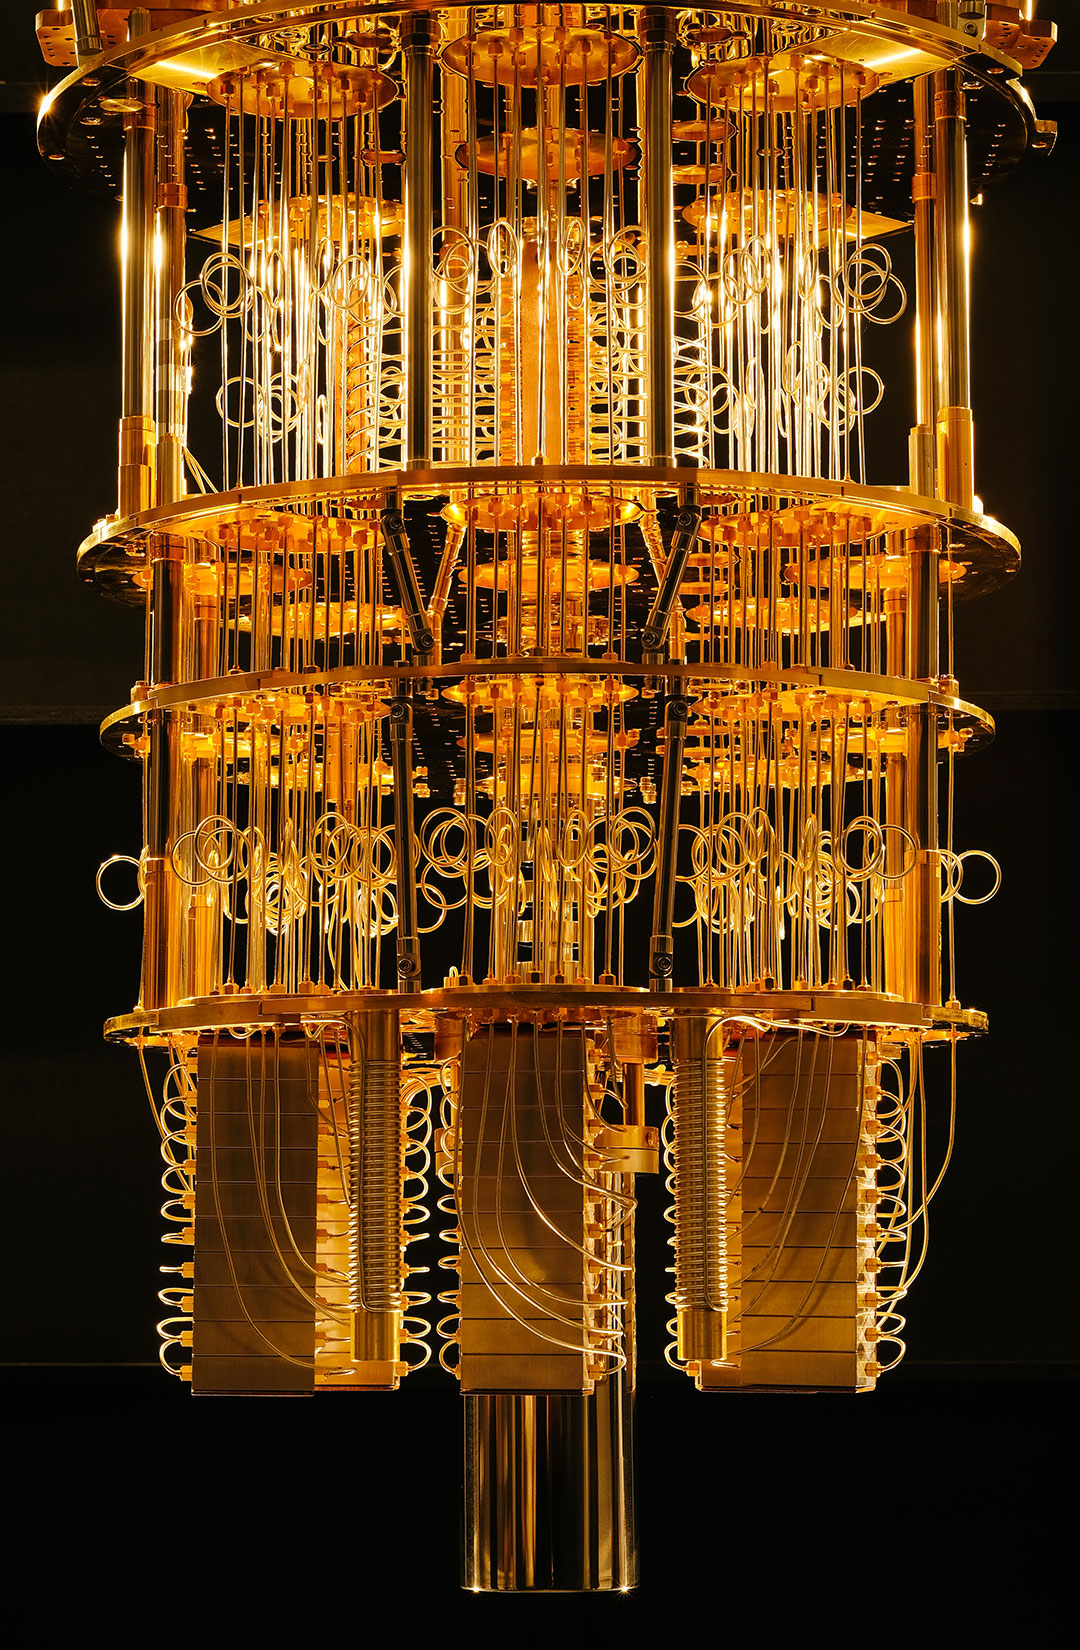 In January 2019, IBM unveiled the world’s first commercial – i.e. non-laboratory – quantum computer: the IBM Q System One. In 2021, the Q System One will be coming to Germany.